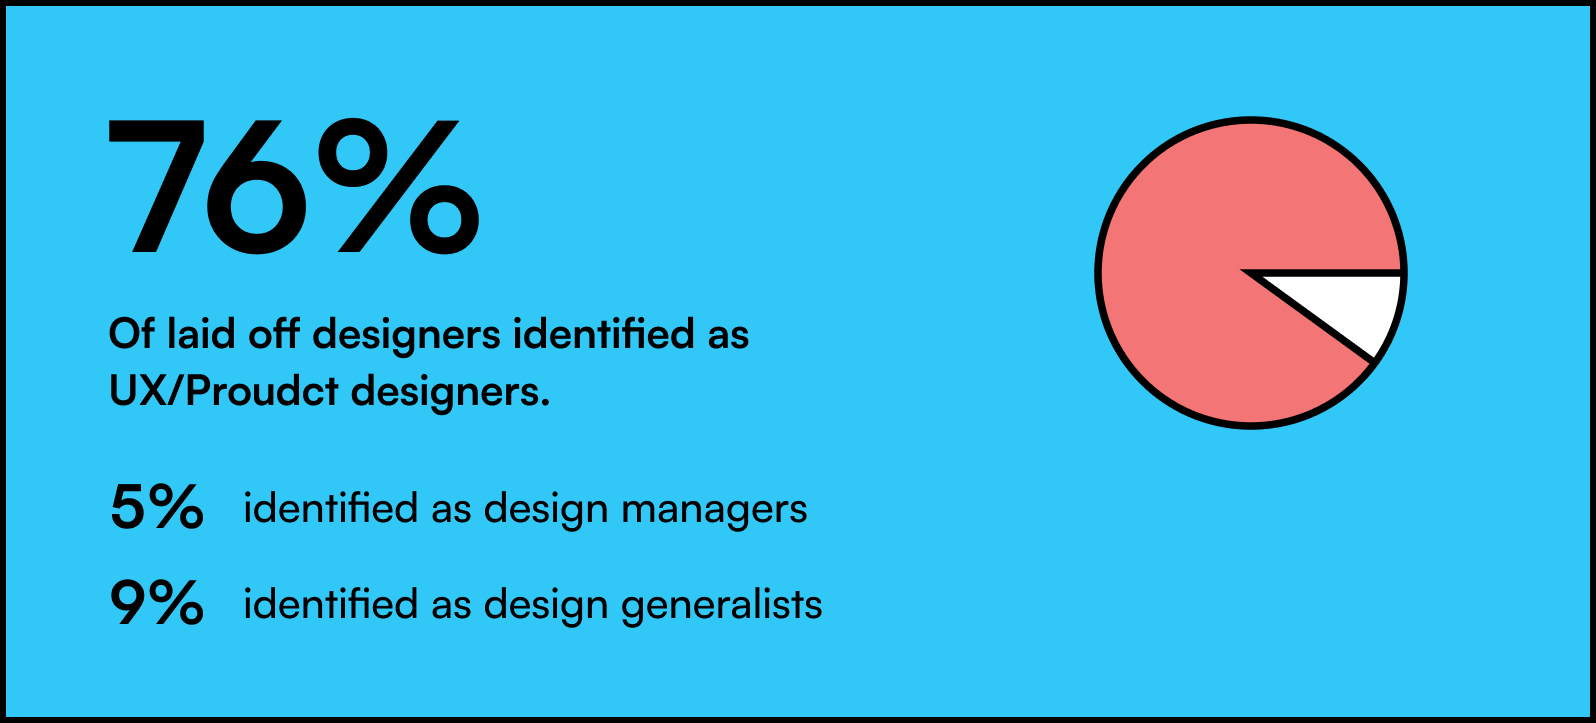 76% of laid-off designers identified as UX/Product designers.